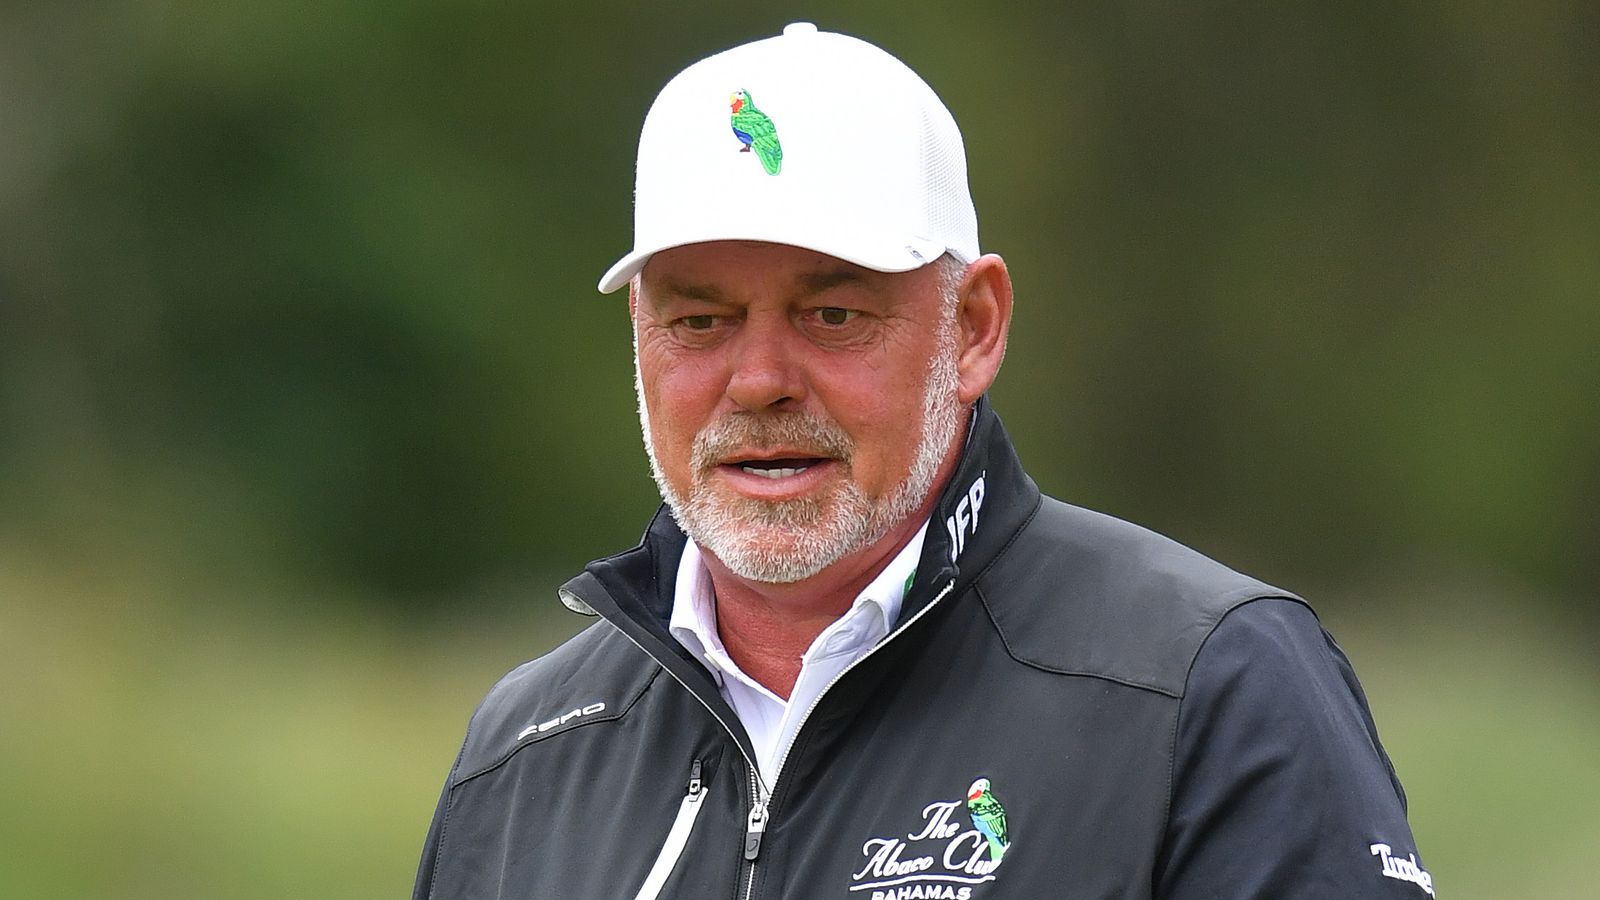 Senior Open: Darren Clarke takes charge with 67 in second round at Gleneagles